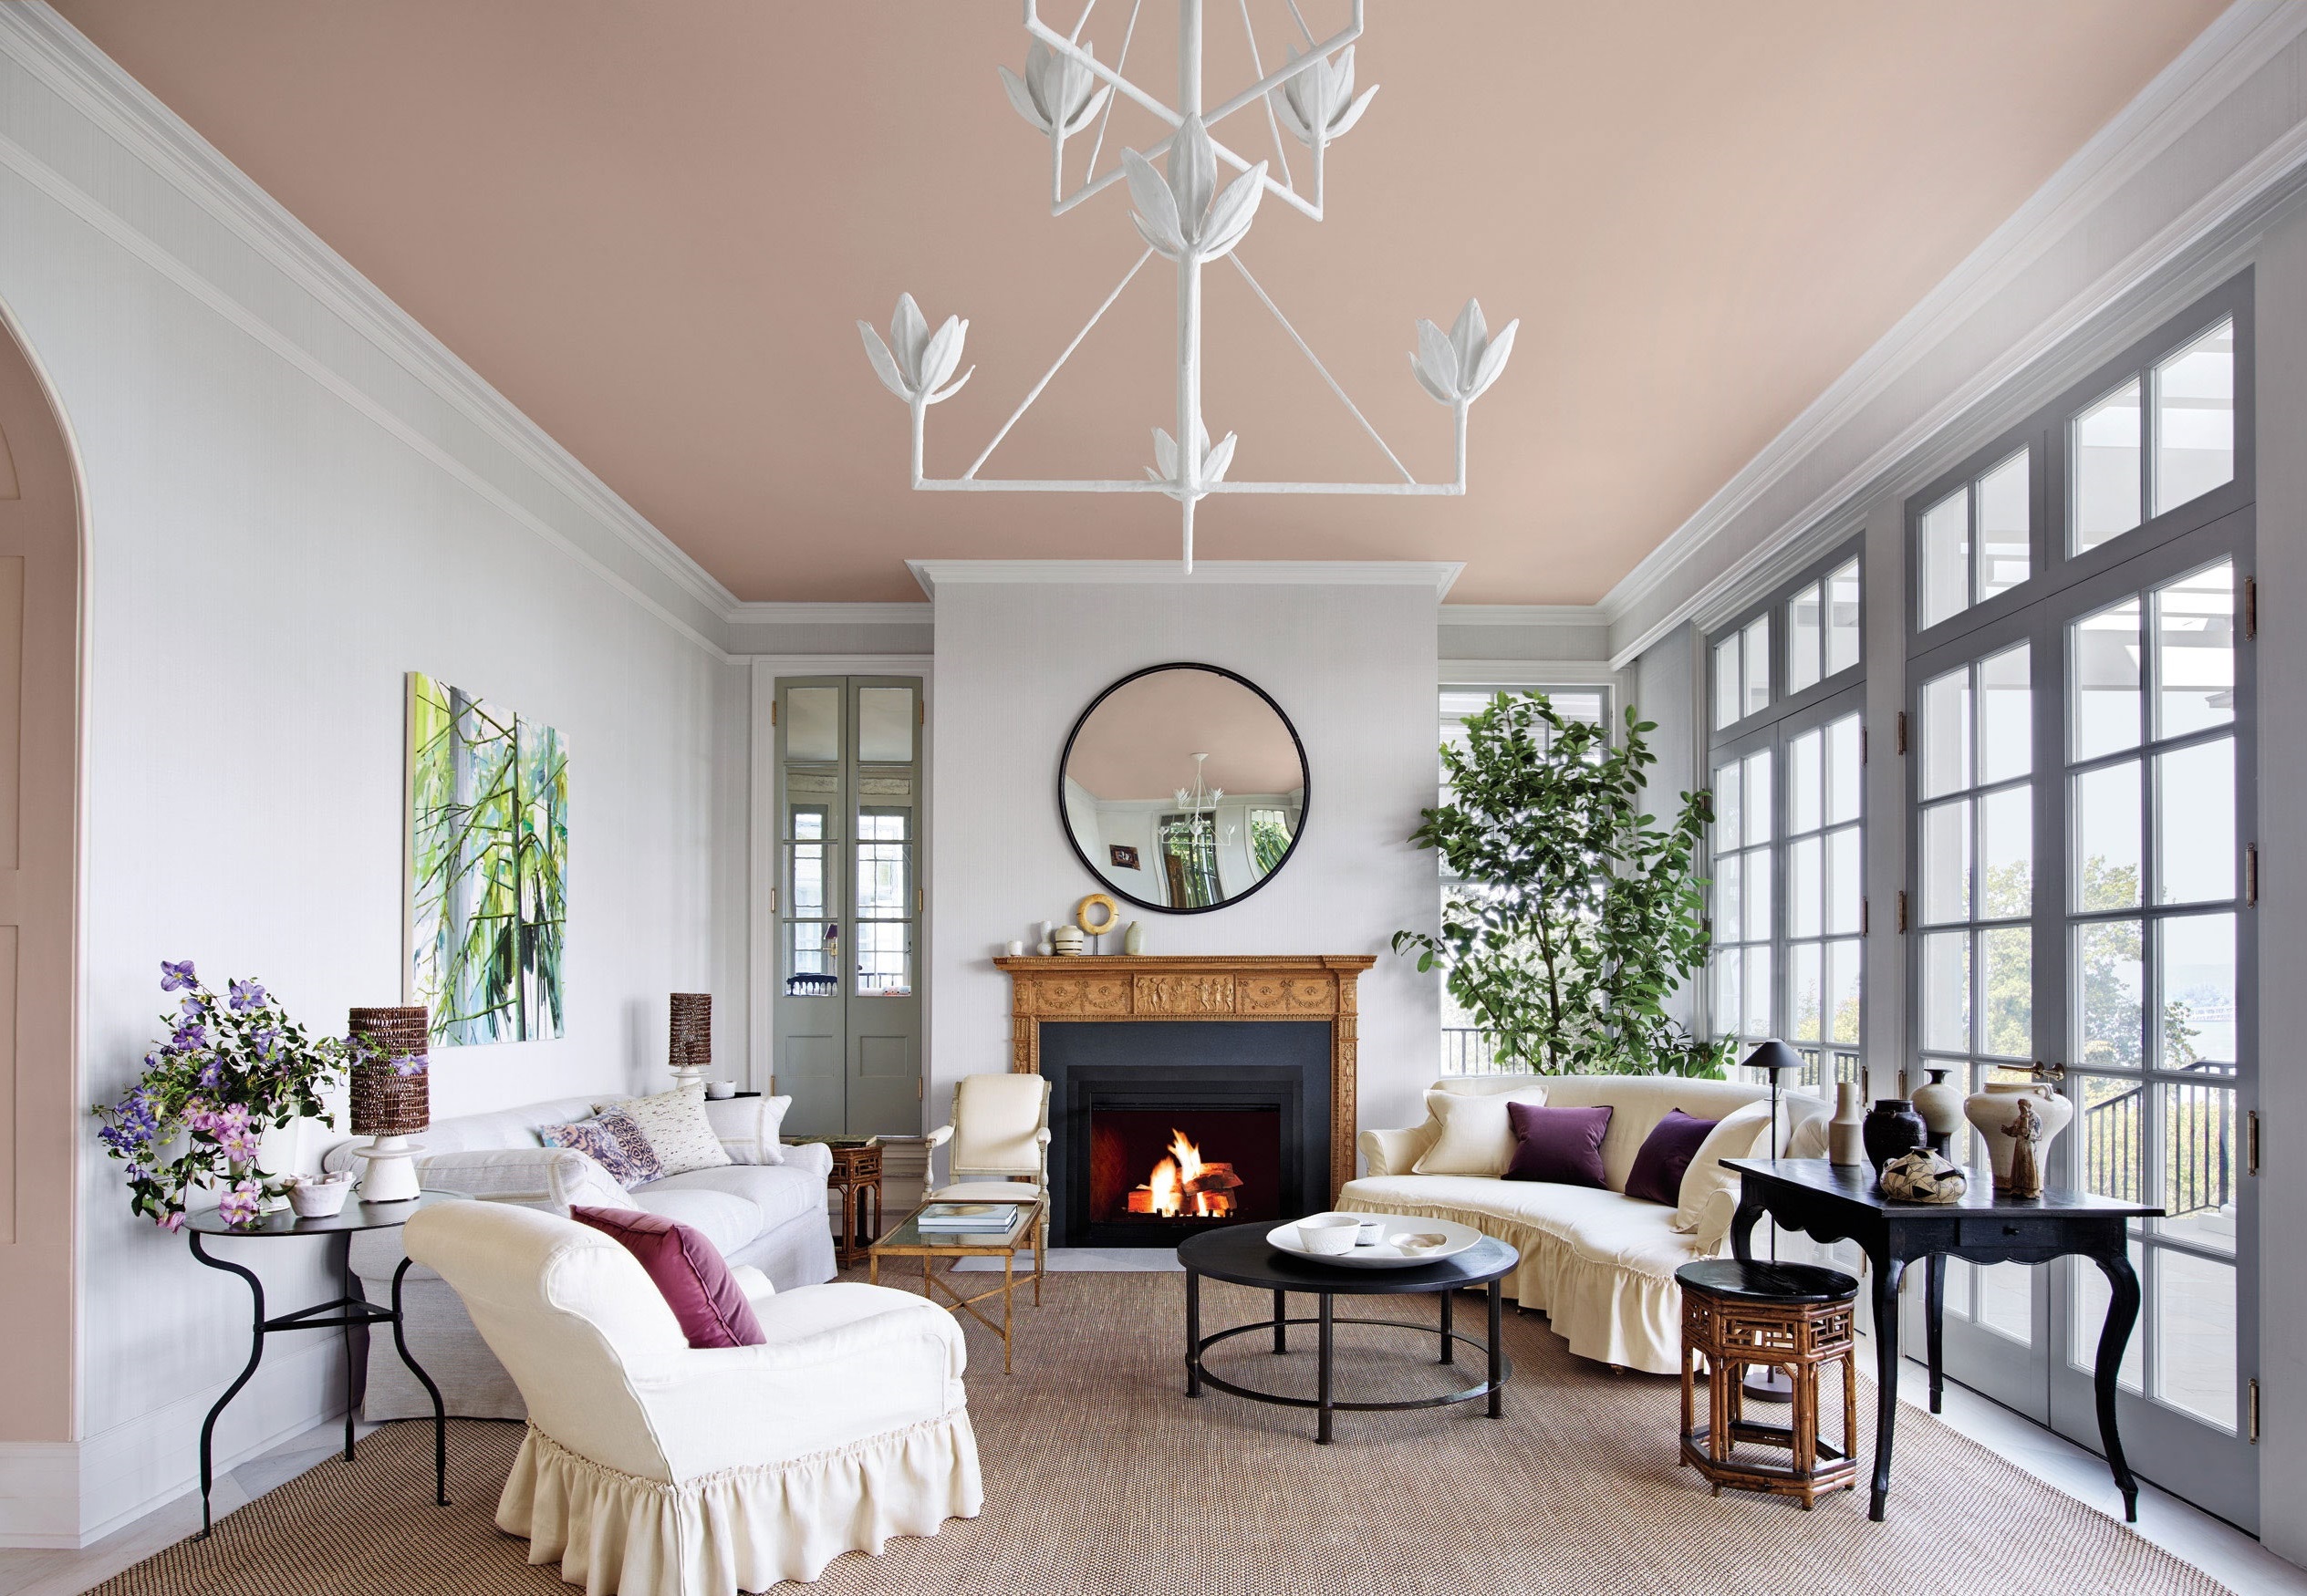 painted ceiling +70 Unique Ceiling Design Ideas for Your Living Room - 17